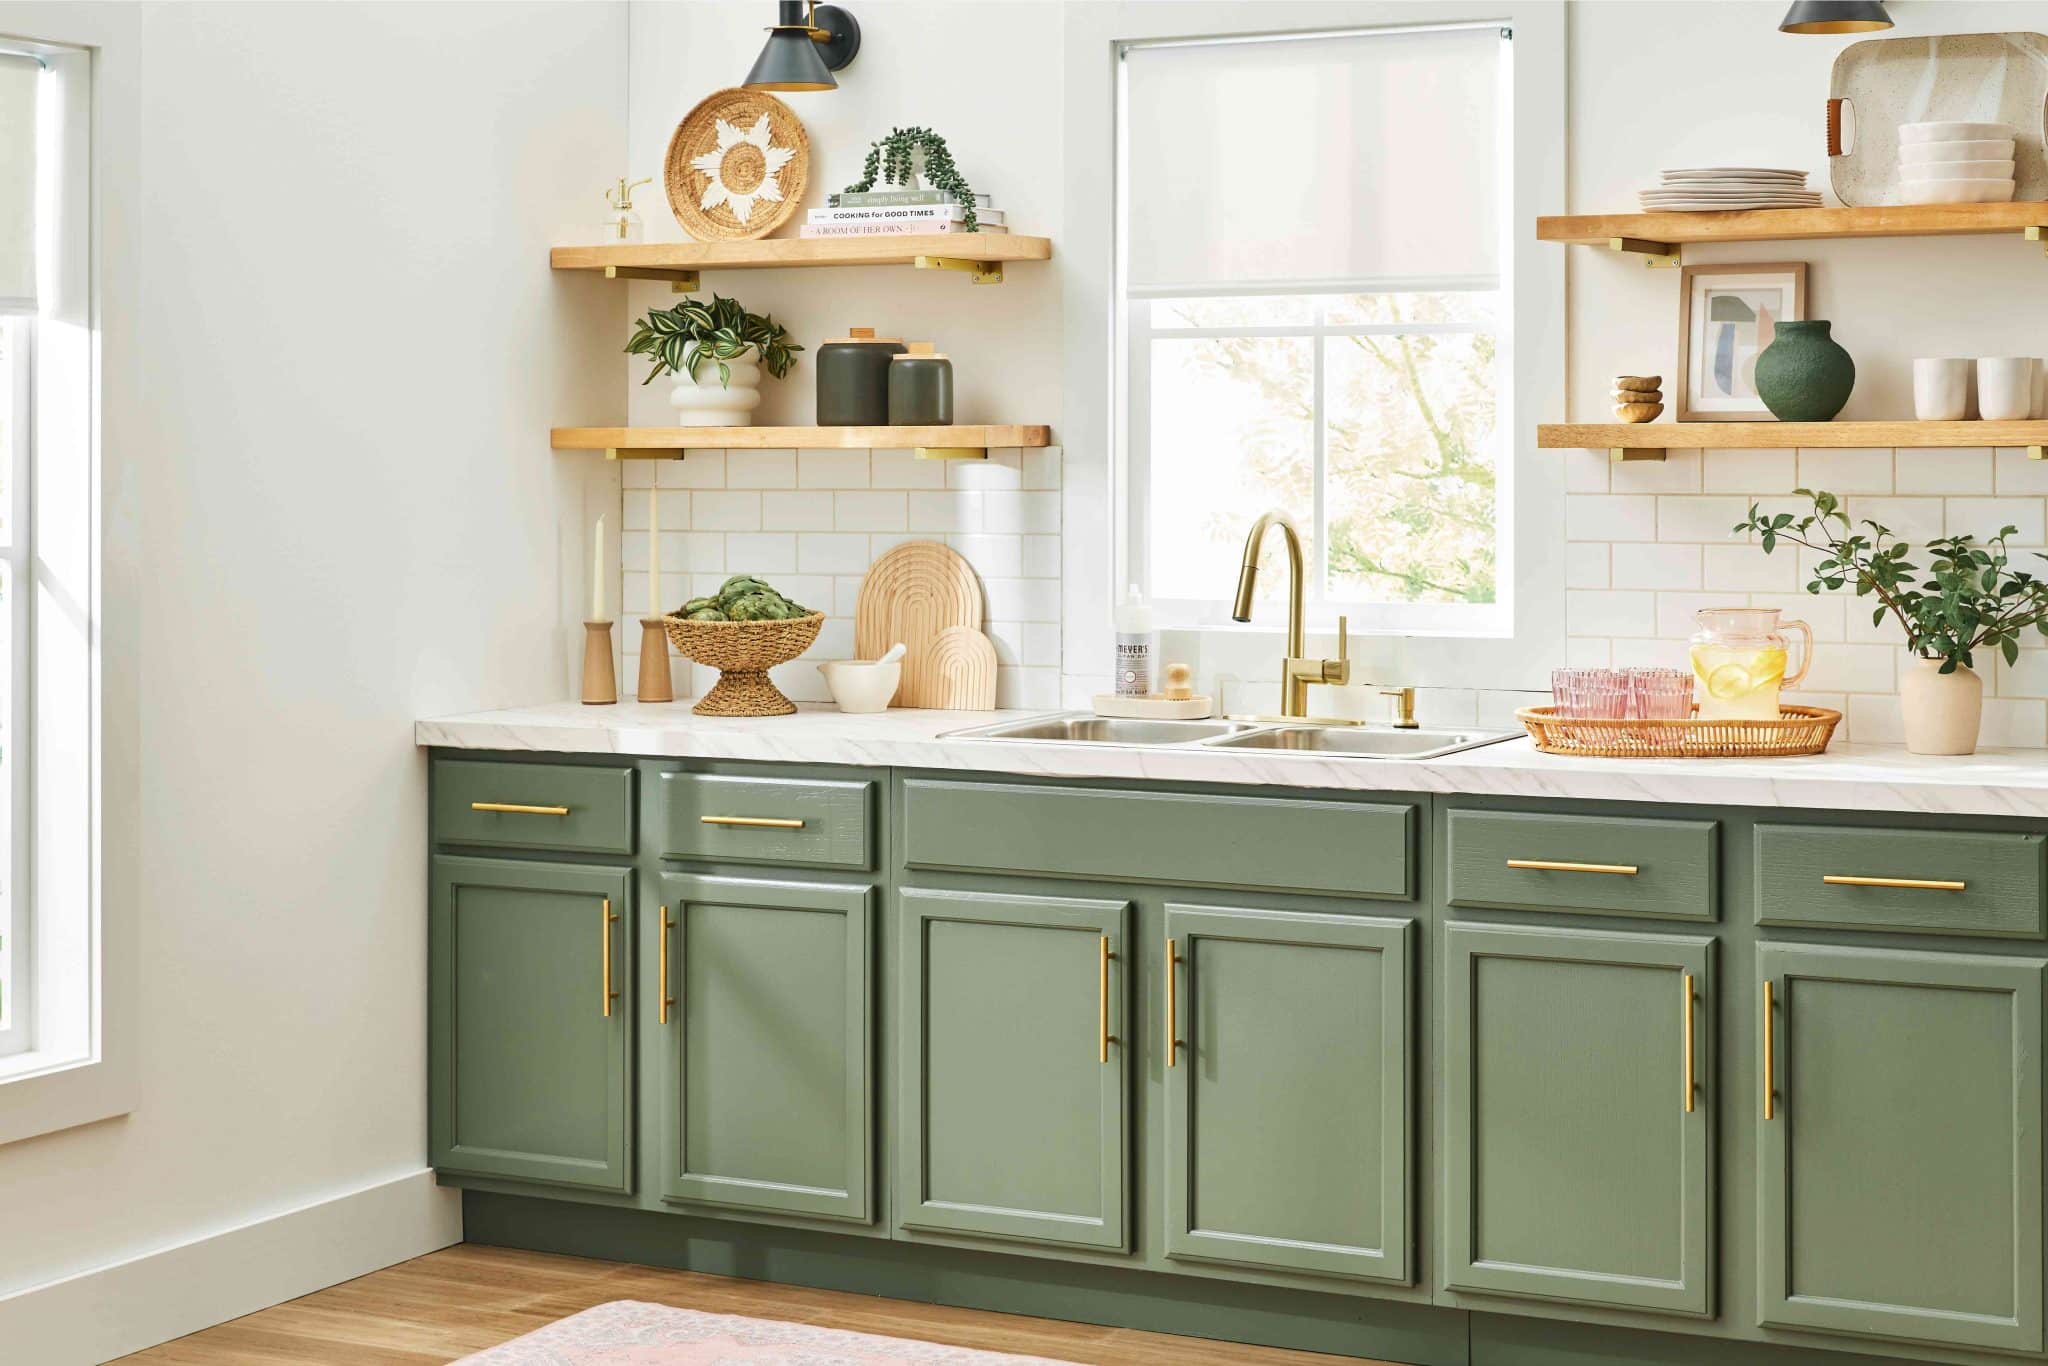 What Are the Current Trends in Using Sage Green in Interior Decoration?